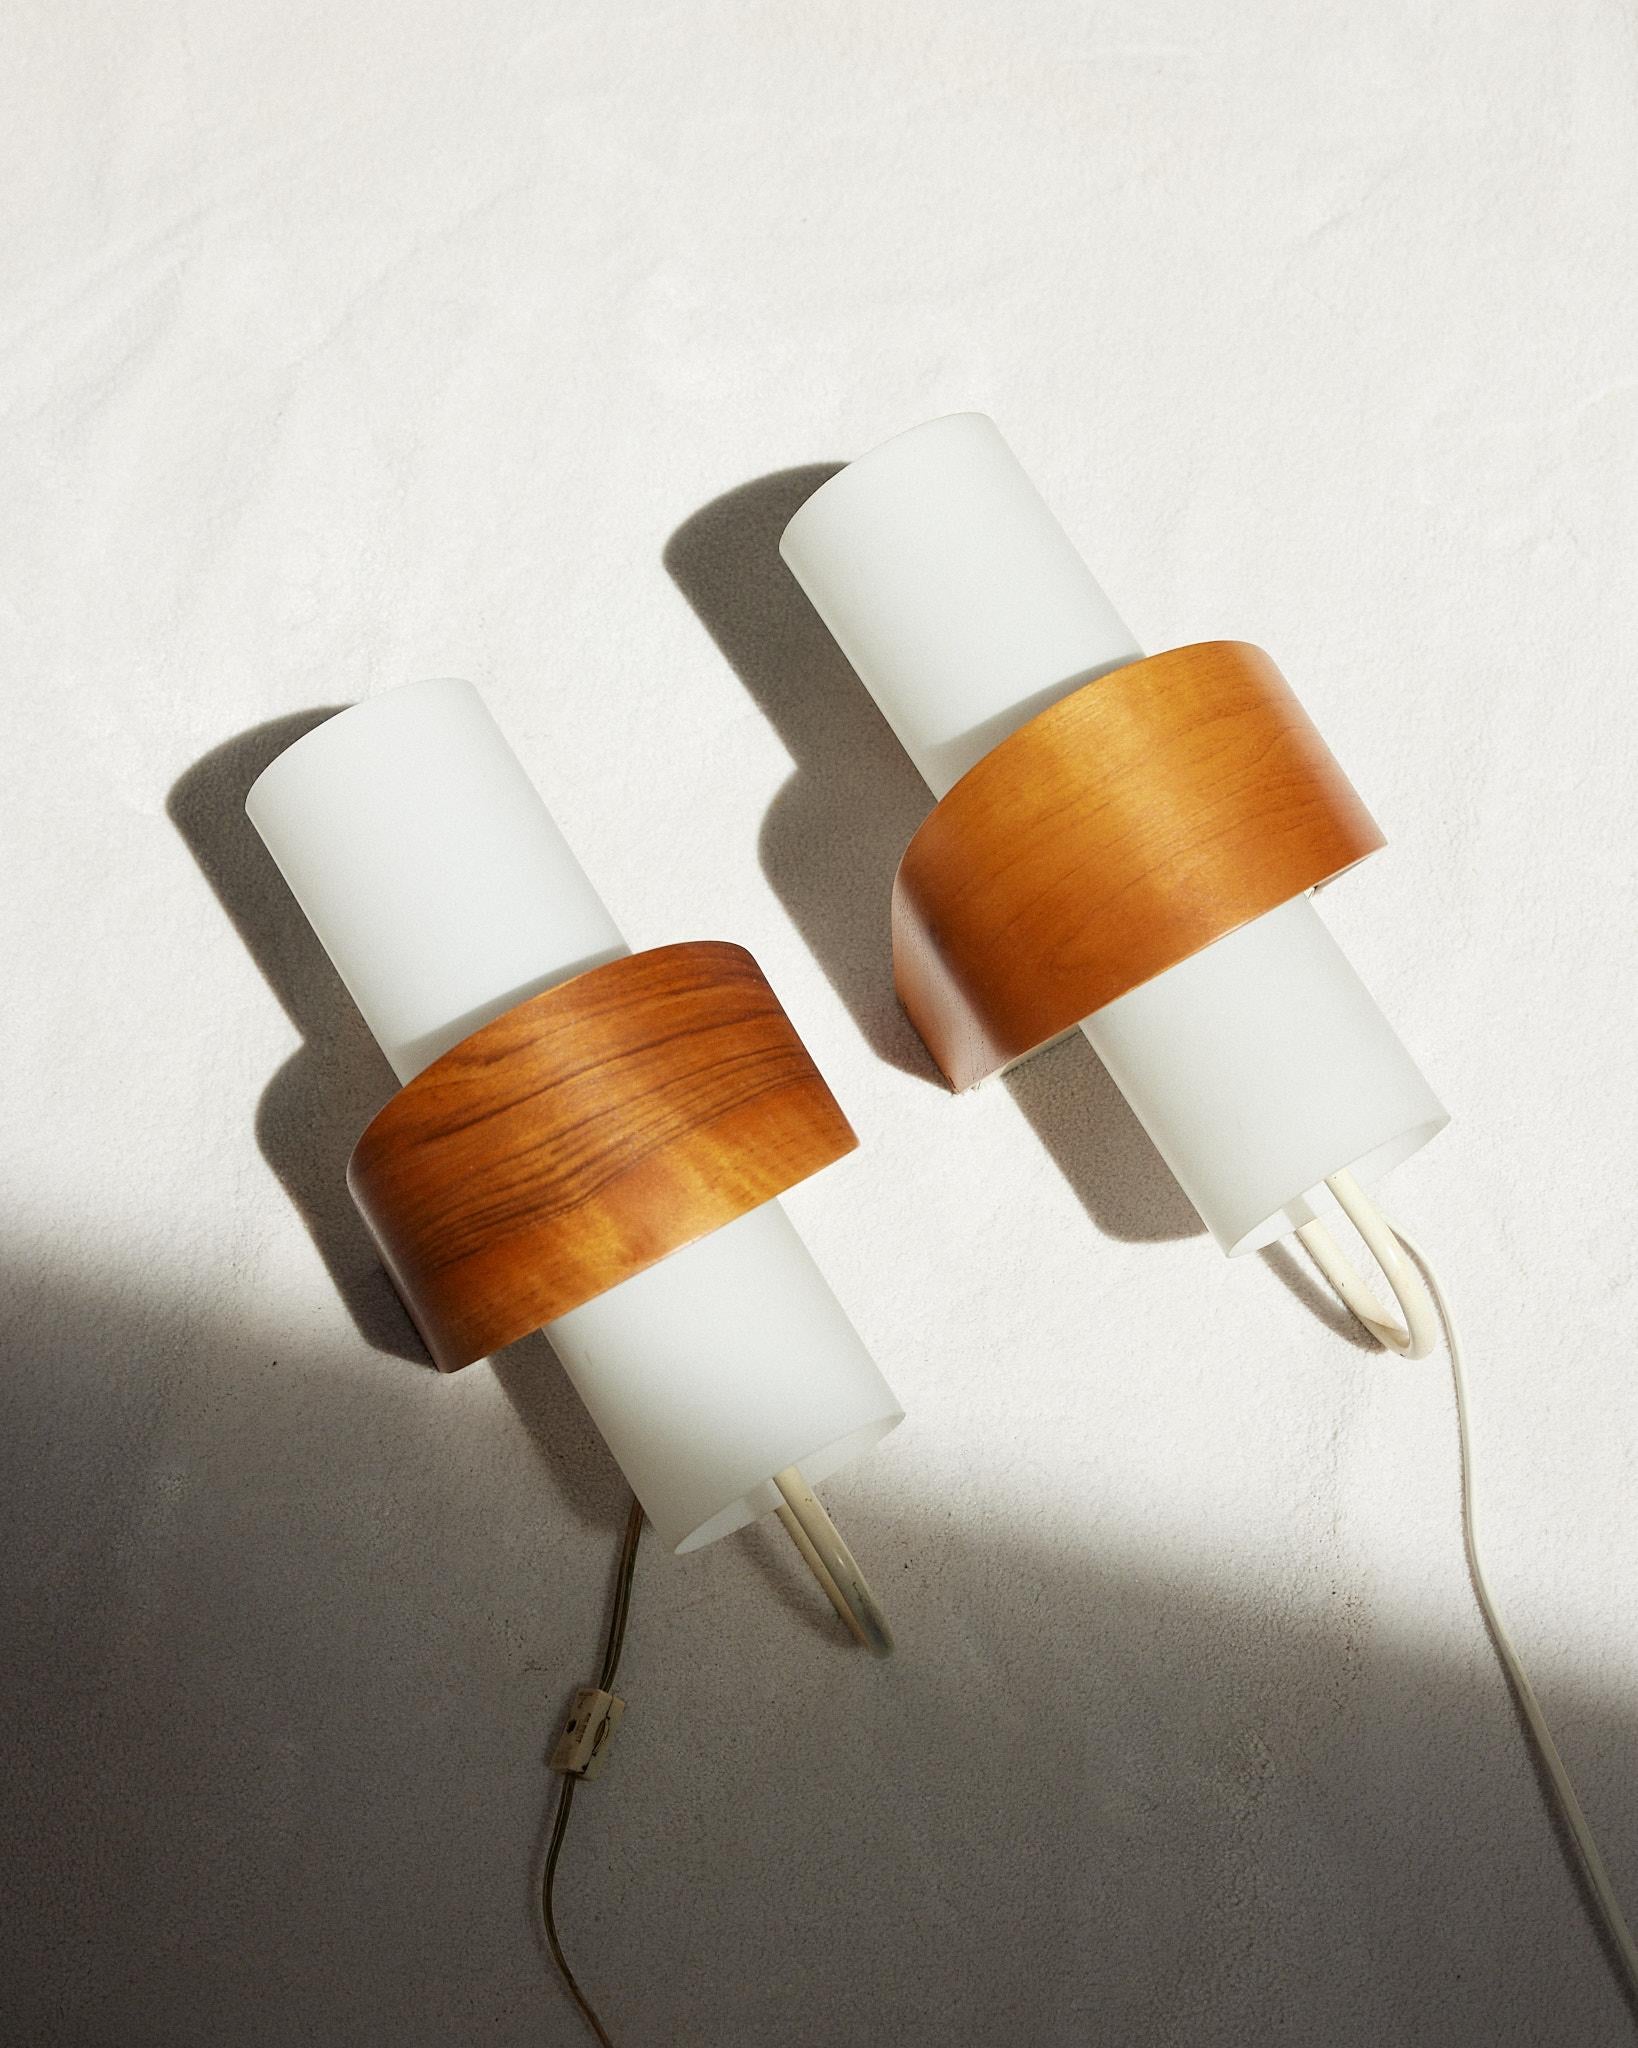 A marvellous set of Phillips wall lamps signed by the famous designer Louis Kalff in the 1950s. The lamps are a combination of metal, teak and milk glass that offers a soft light that pleasantly fills the room, creating focus and atmosphere.